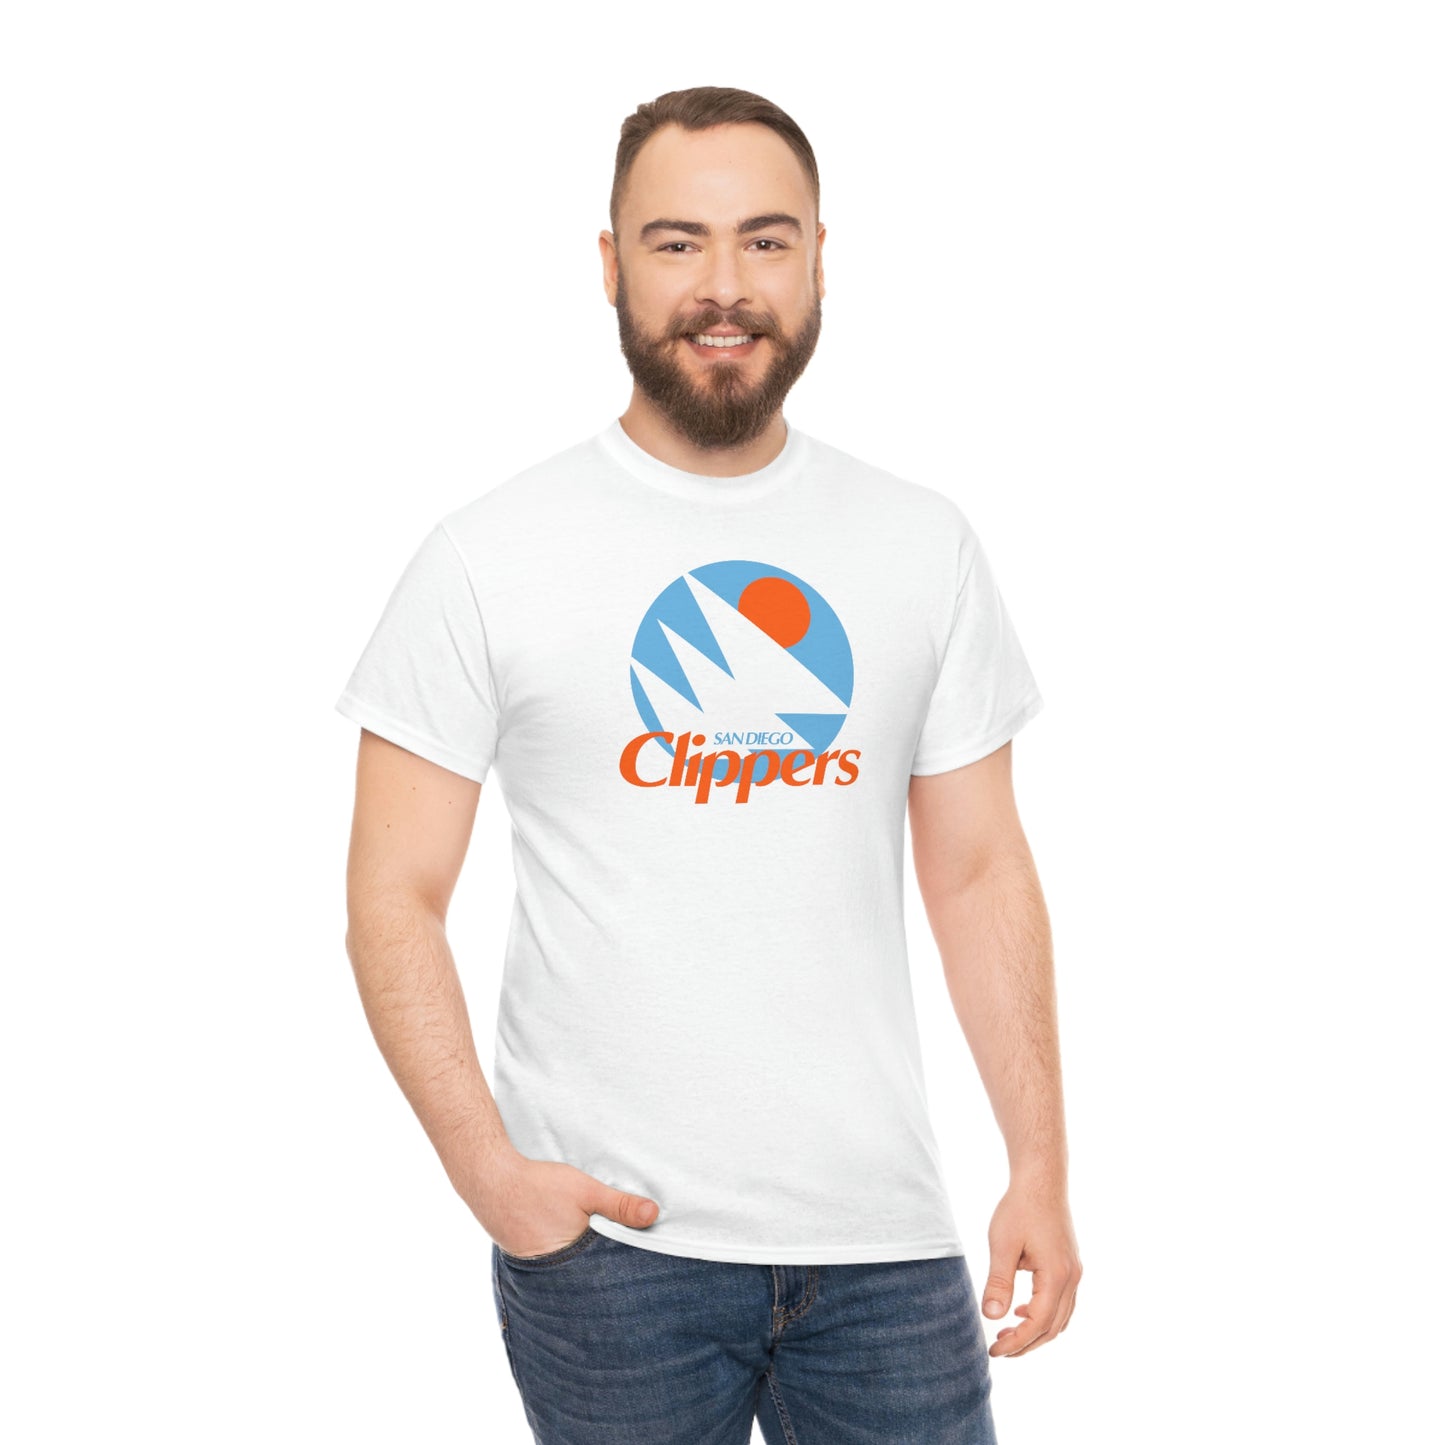 San Diego Clippers T-Shirt